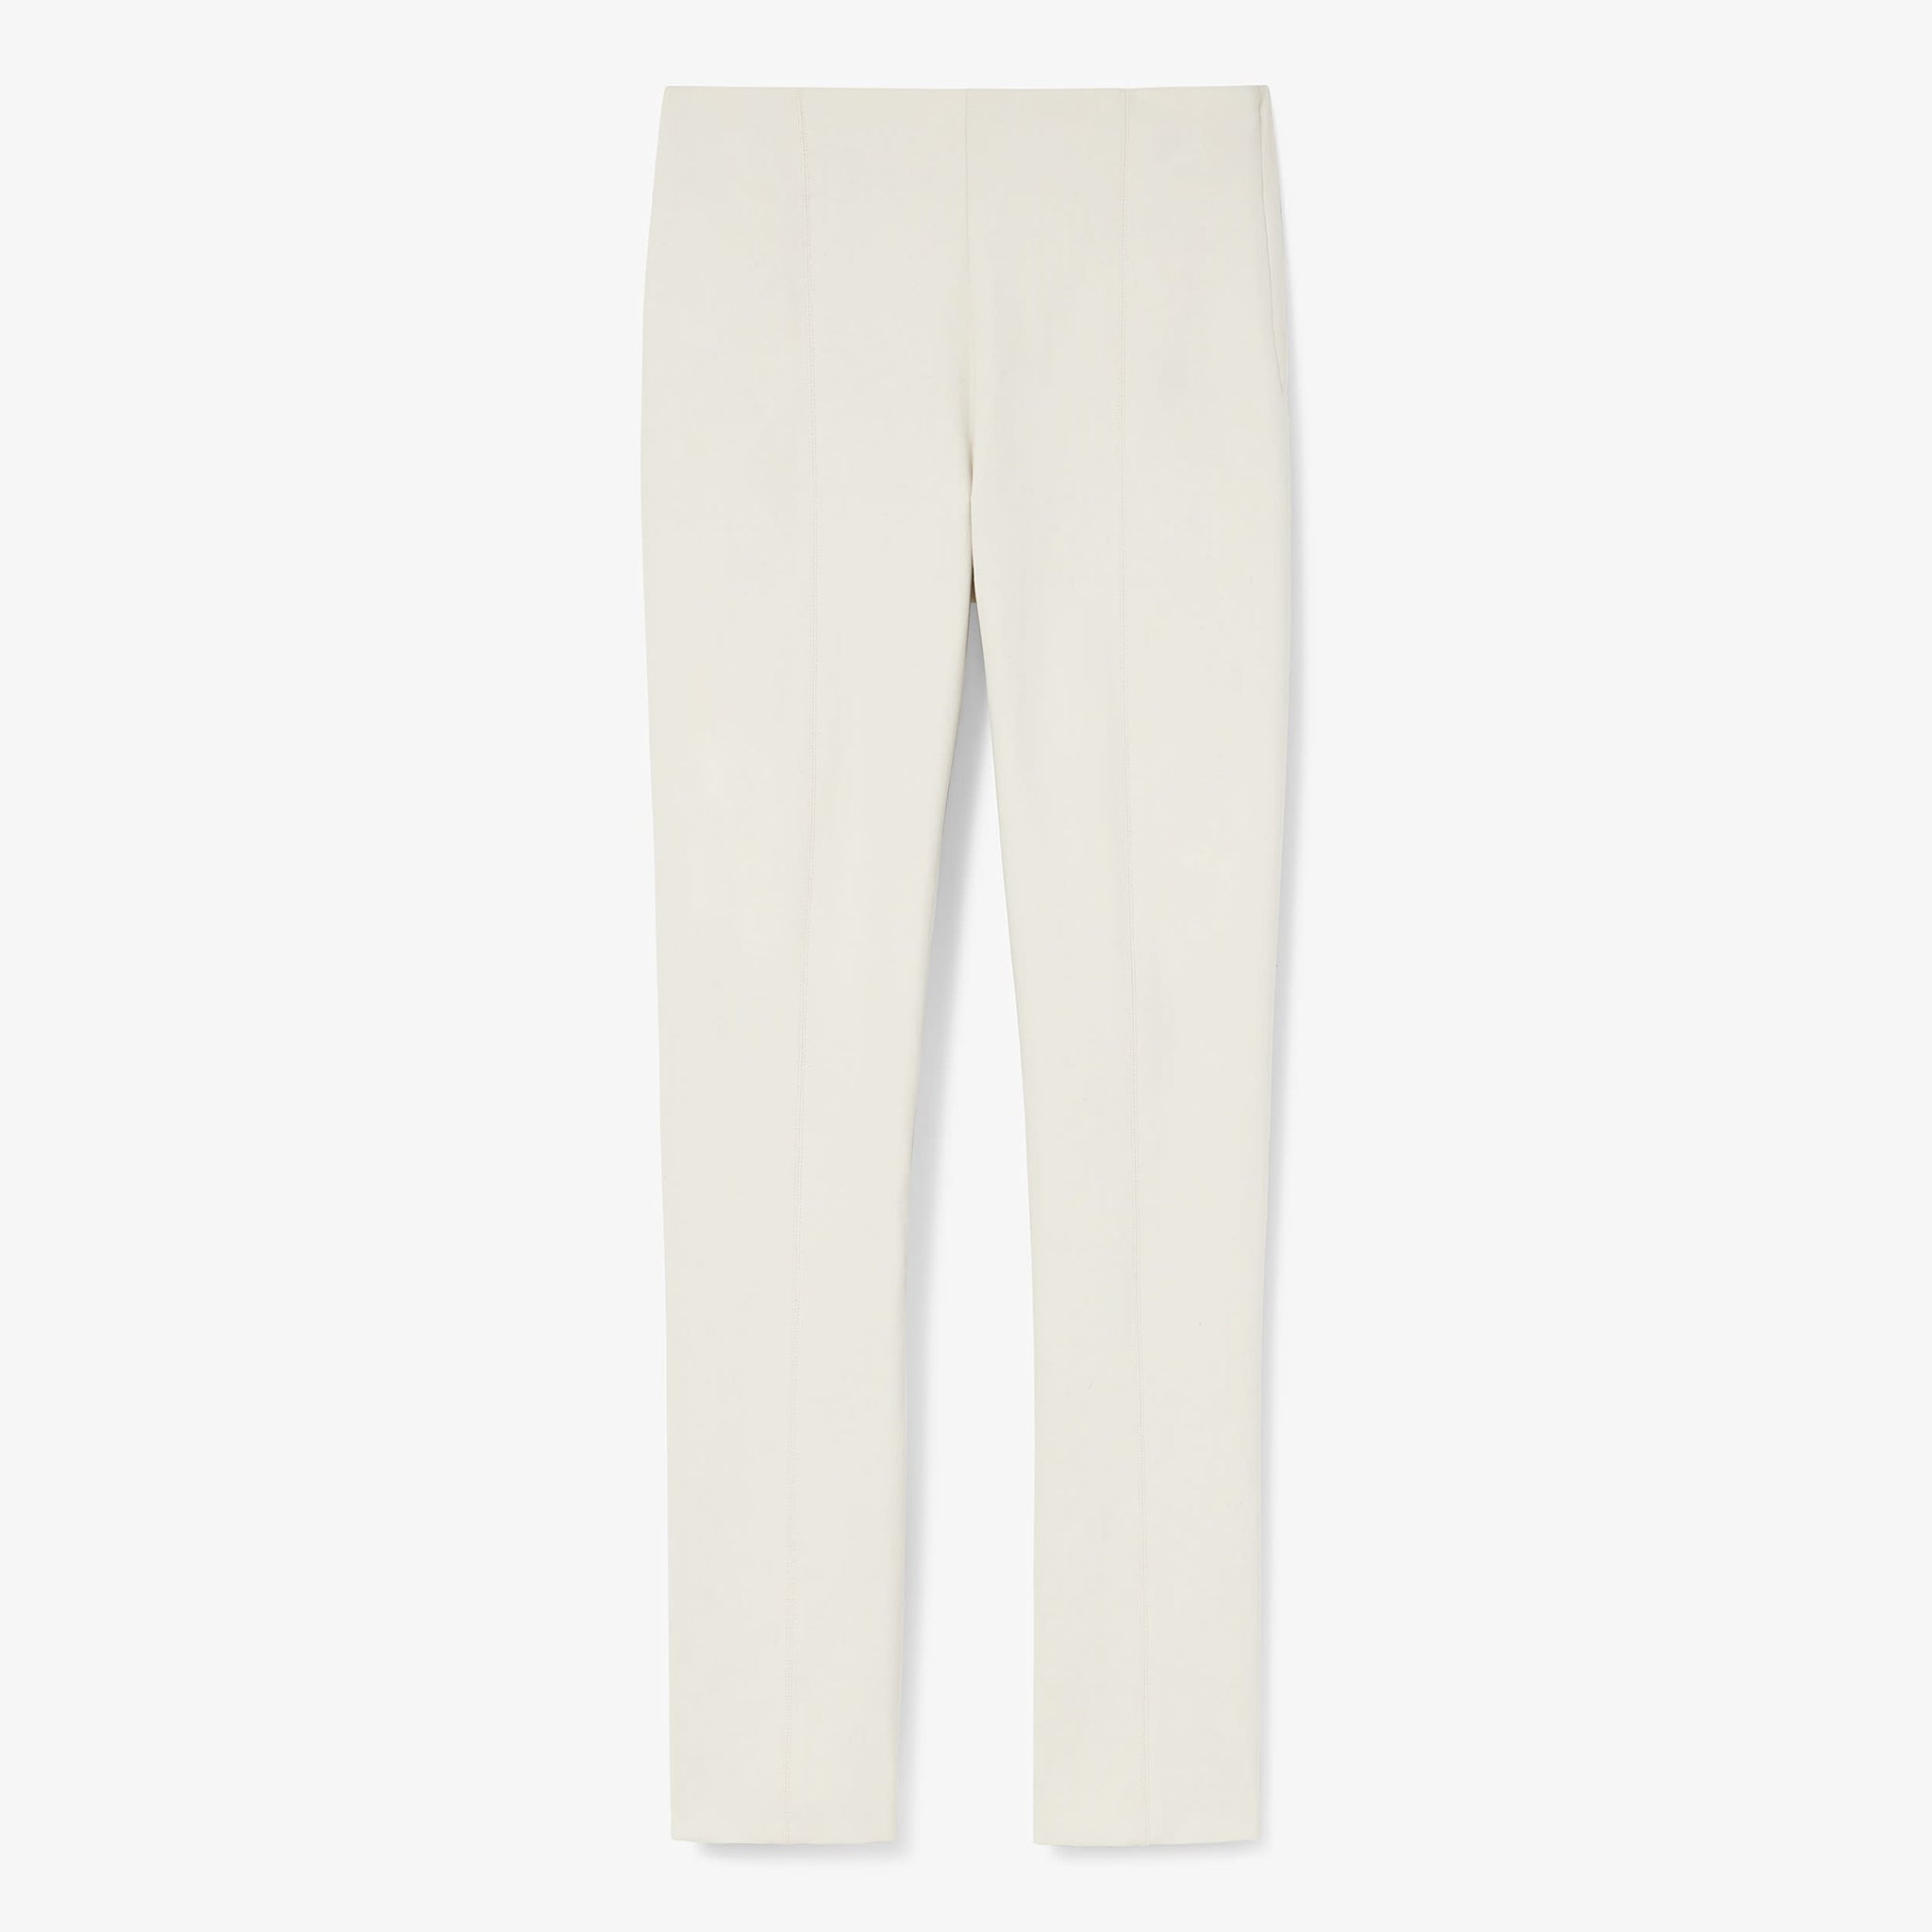 Packshot image of the Foster Pant in bone.